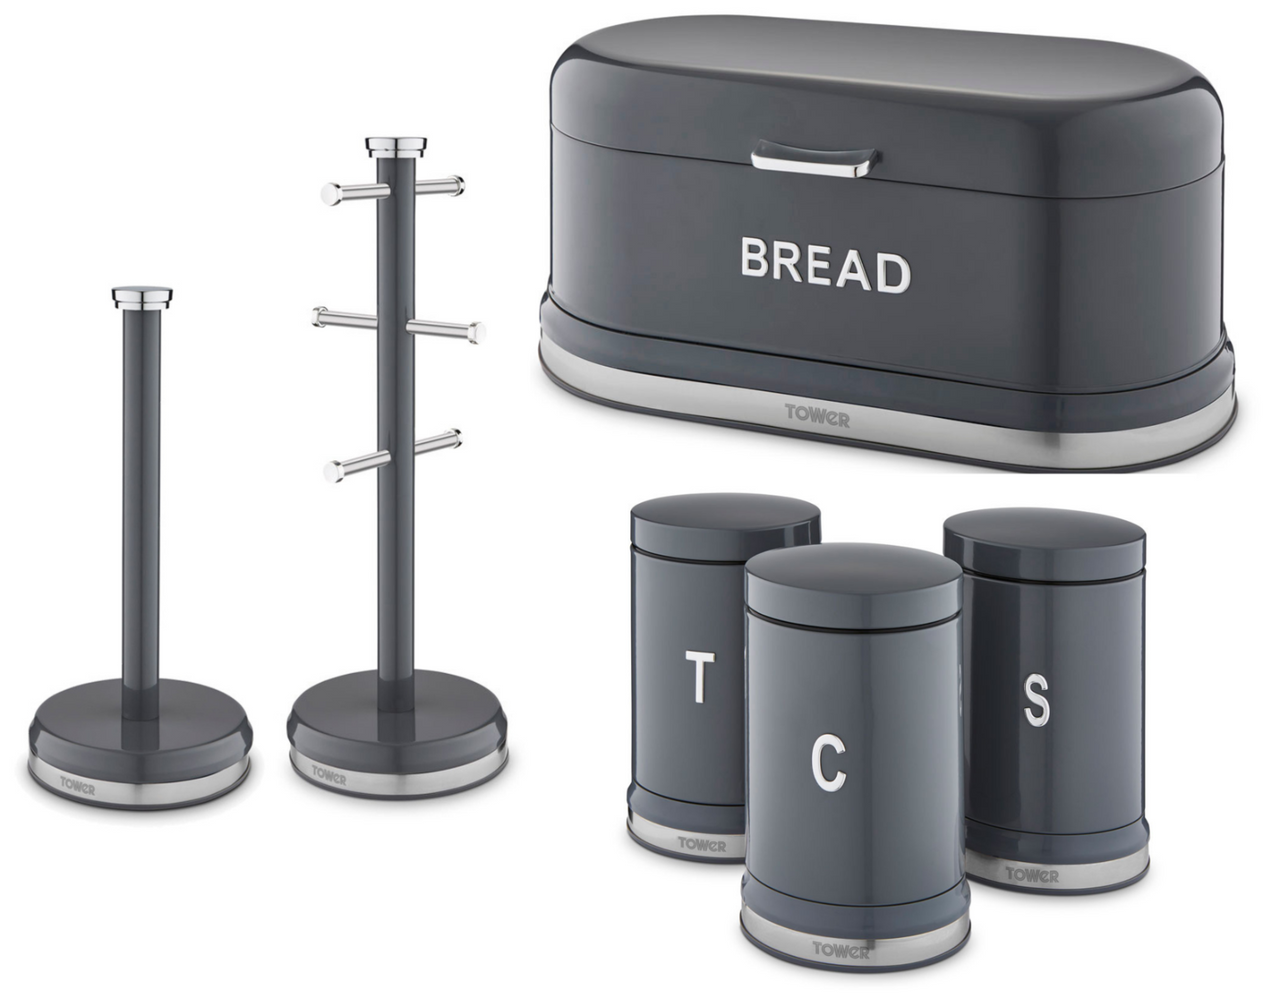 Tower Belle Bread Bin, Canisters, Mug Tree & Towel Pole Kitchen Set of 5 in Graphite Grey